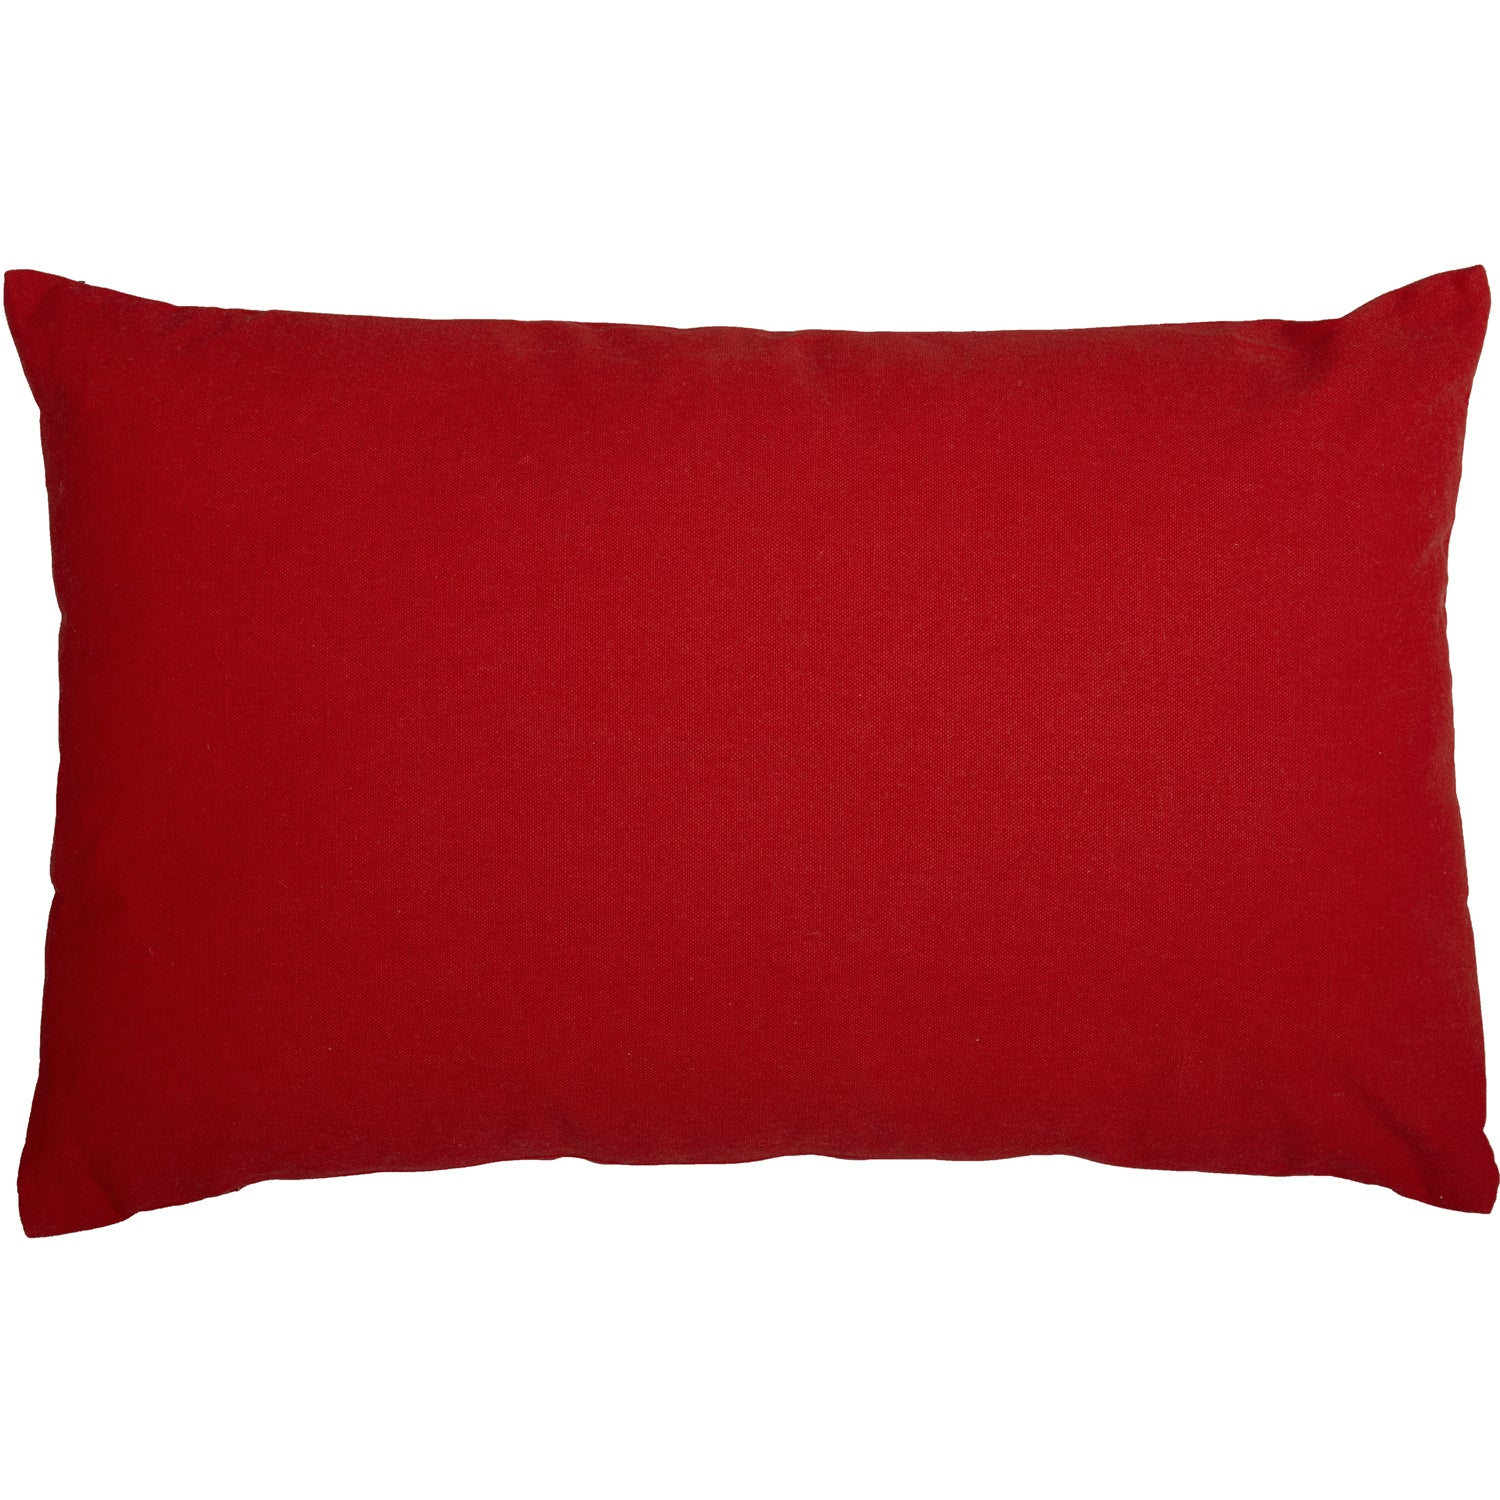 60359-North-Pole-Airmail-Pillow-14x22-image-4